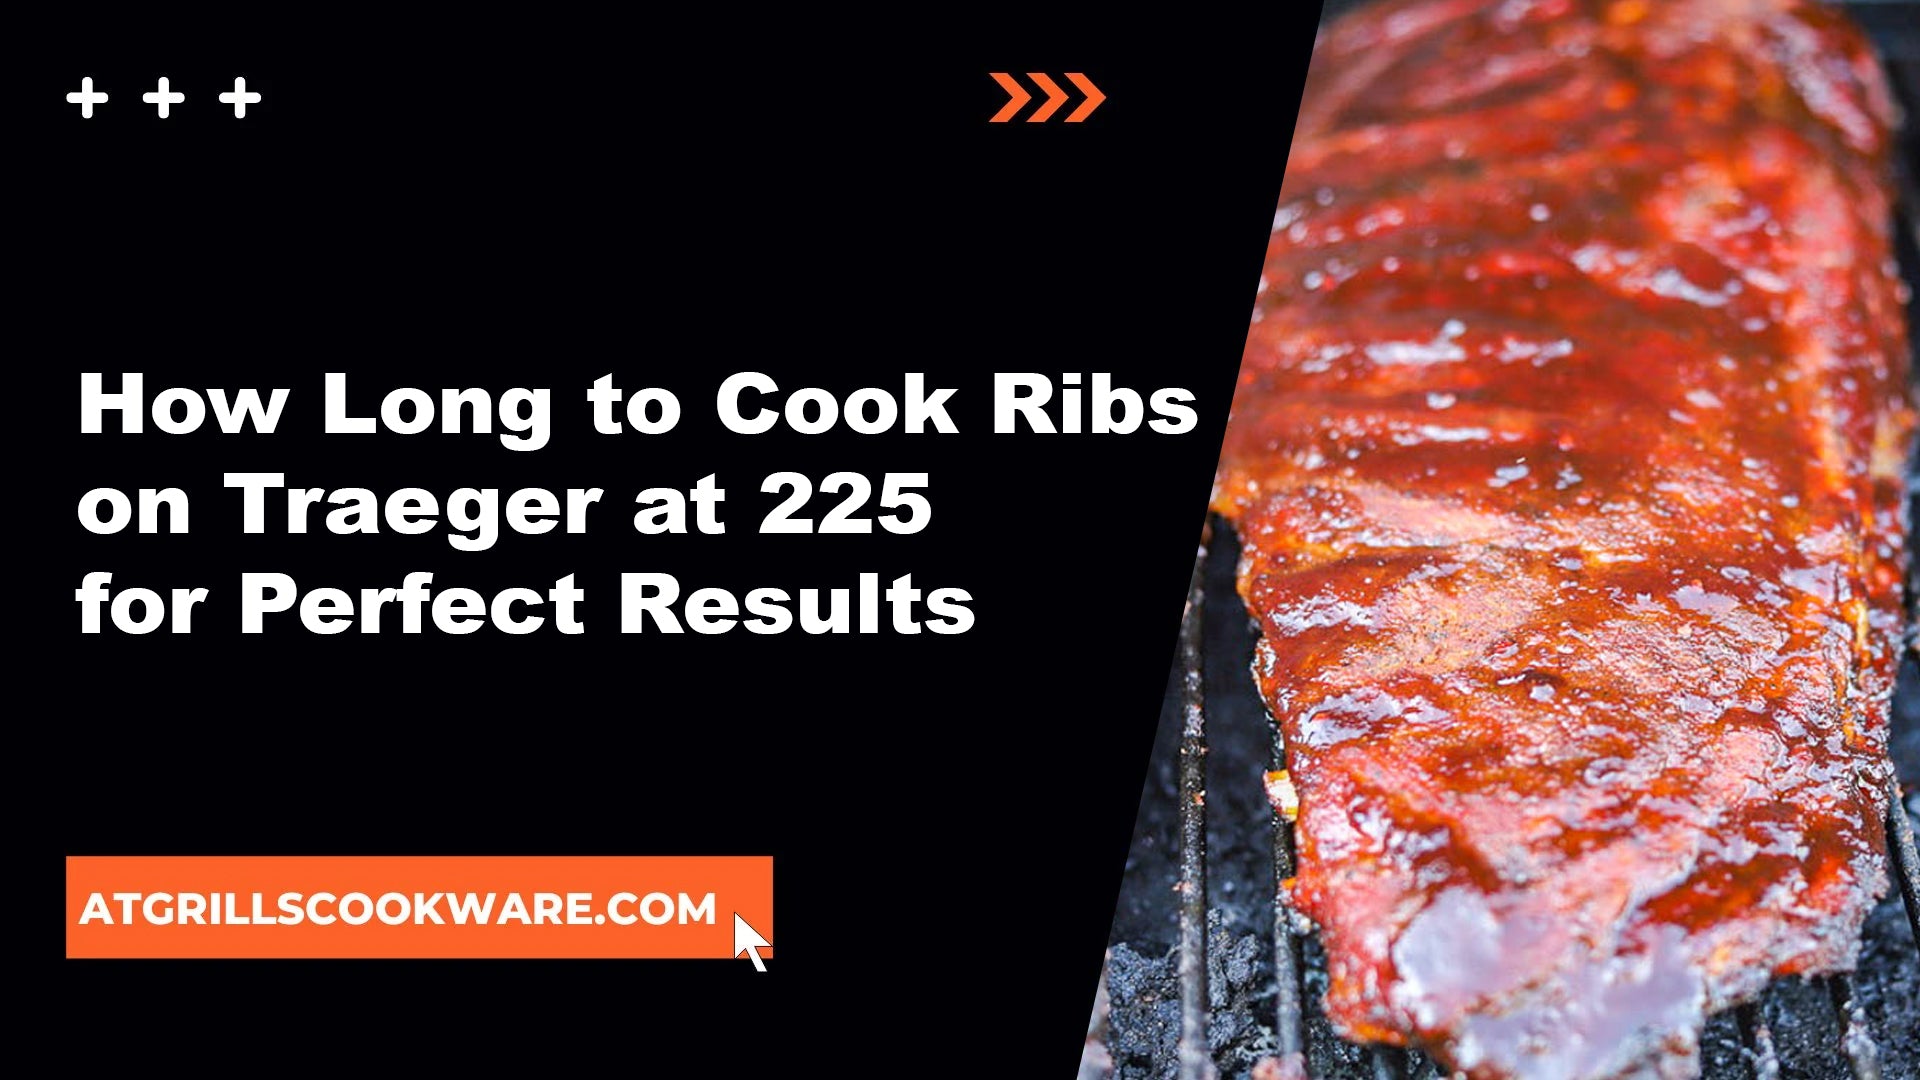 How Long to Cook Ribs on Traeger at 225 for Perfect Results